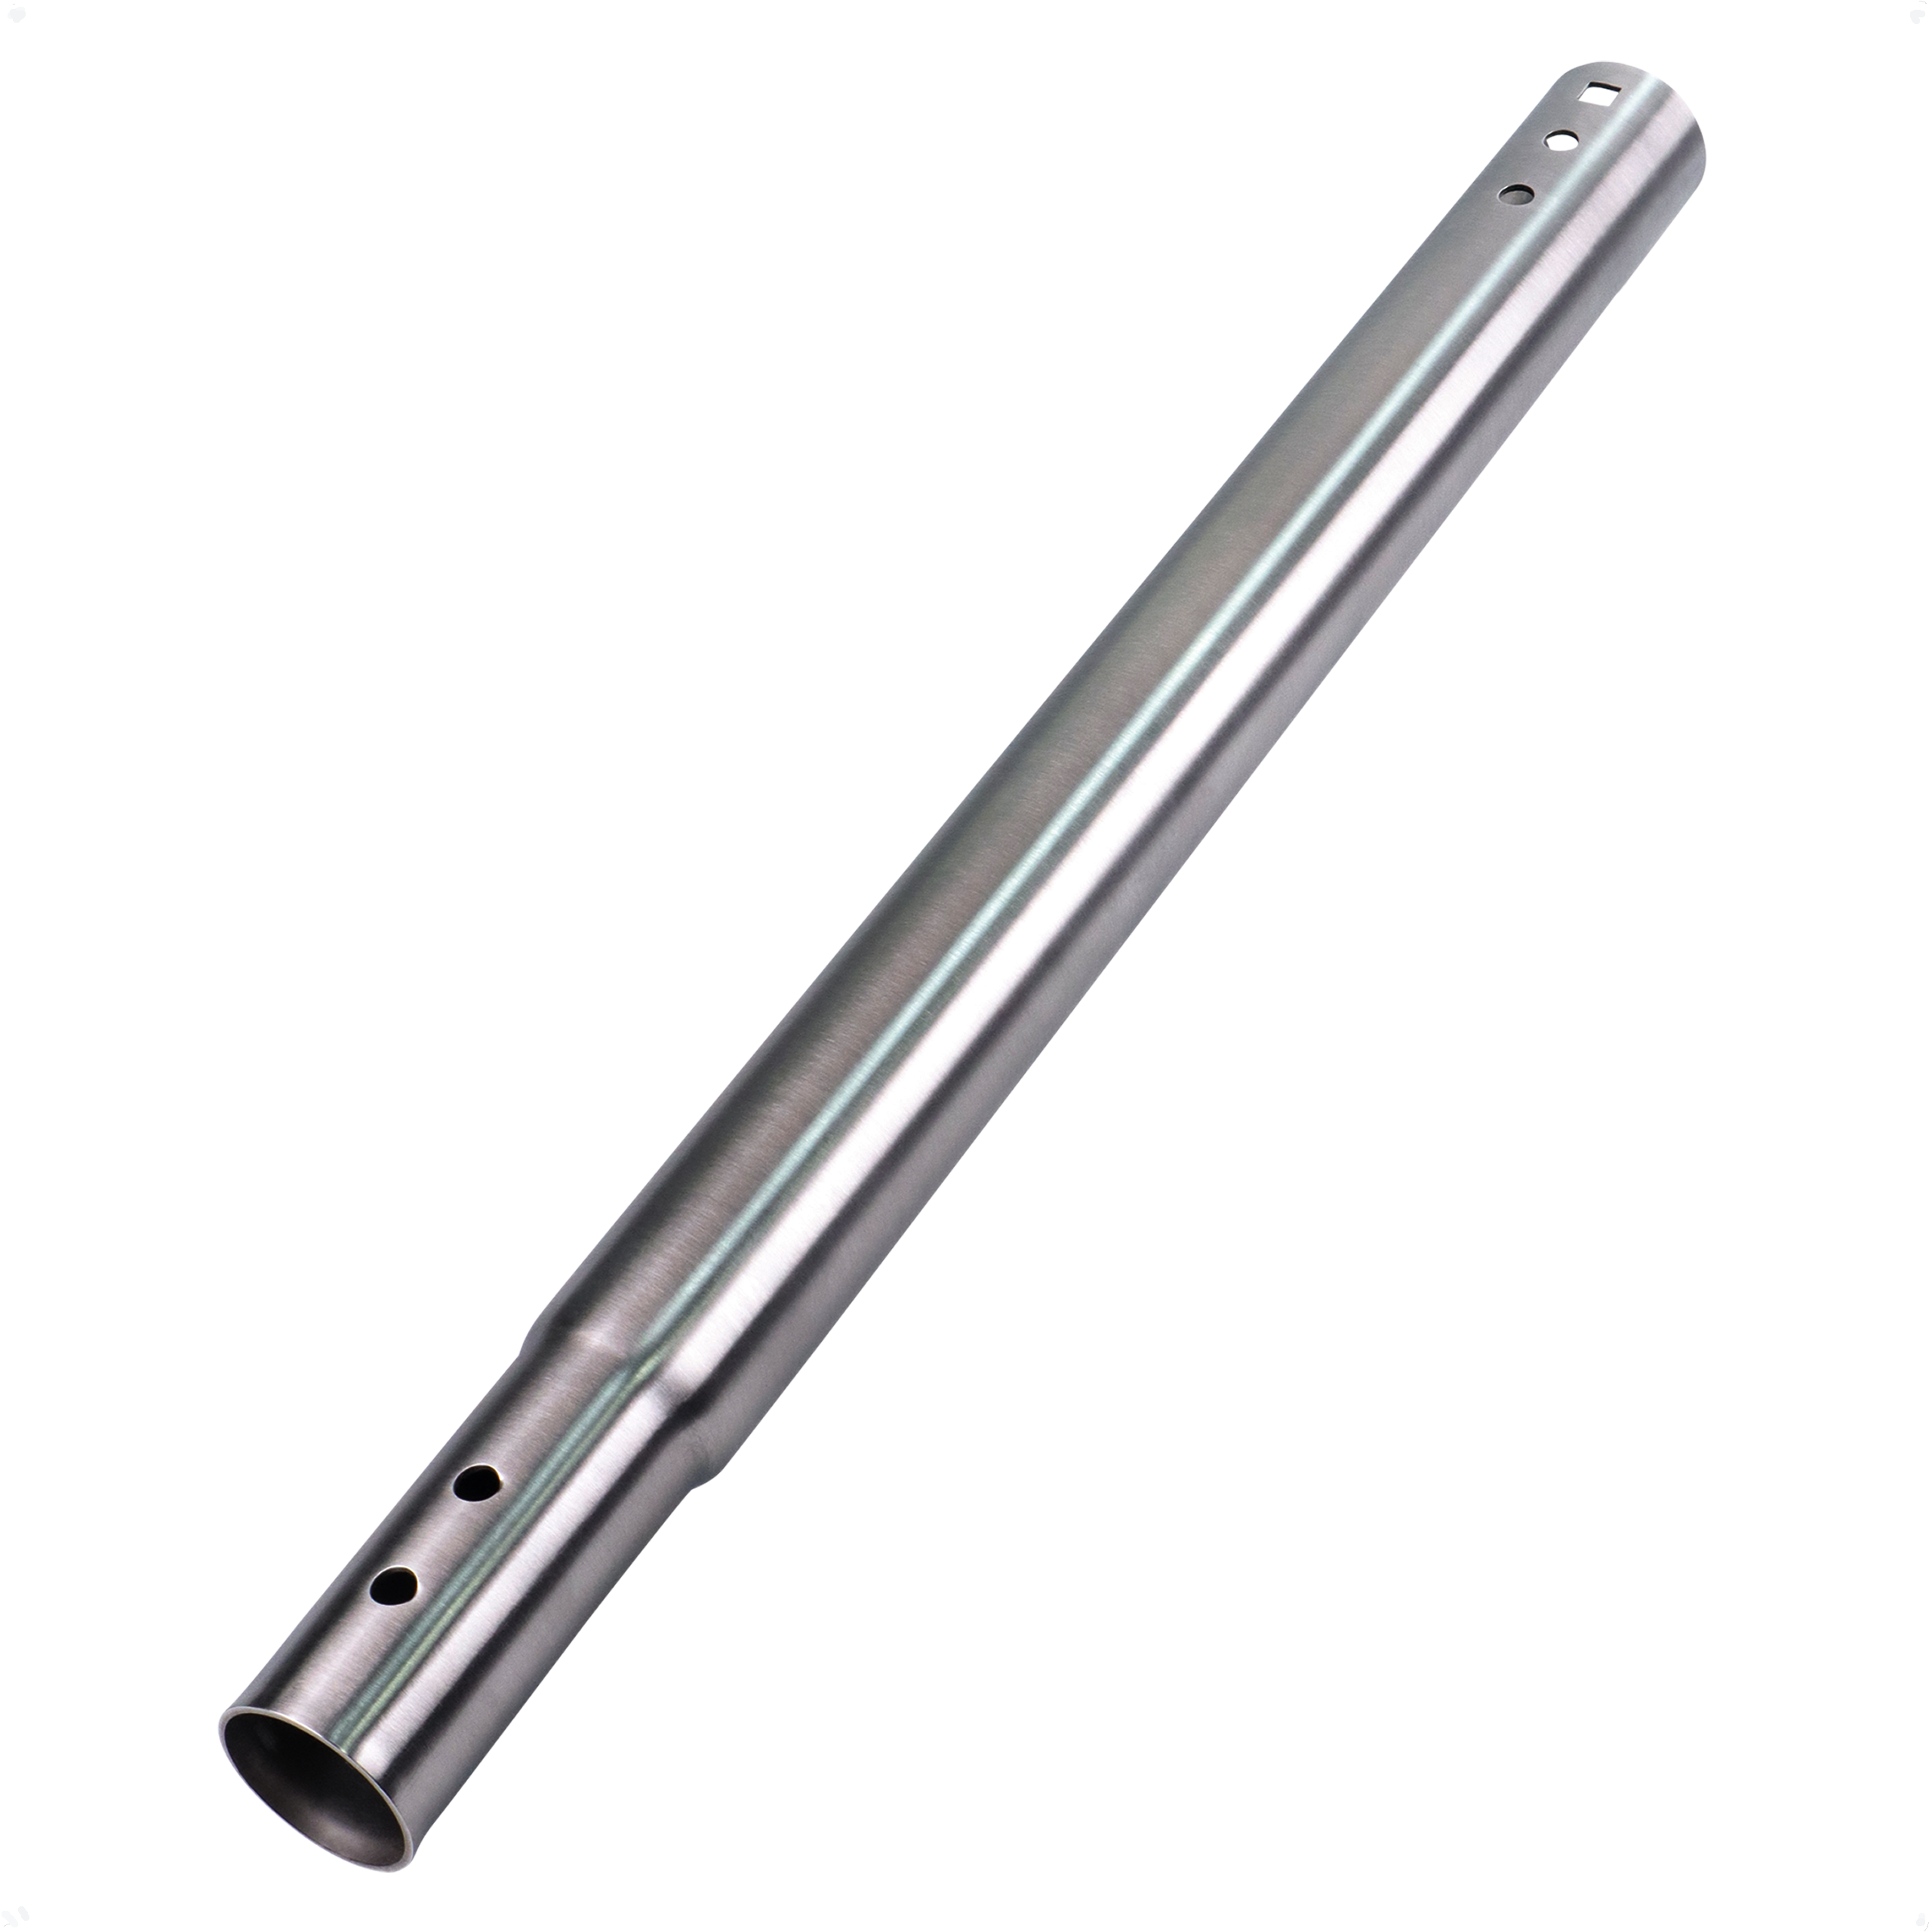 15 inch Stainless Steel Extension Pole for Proxicast J-Max Antenna Mounts